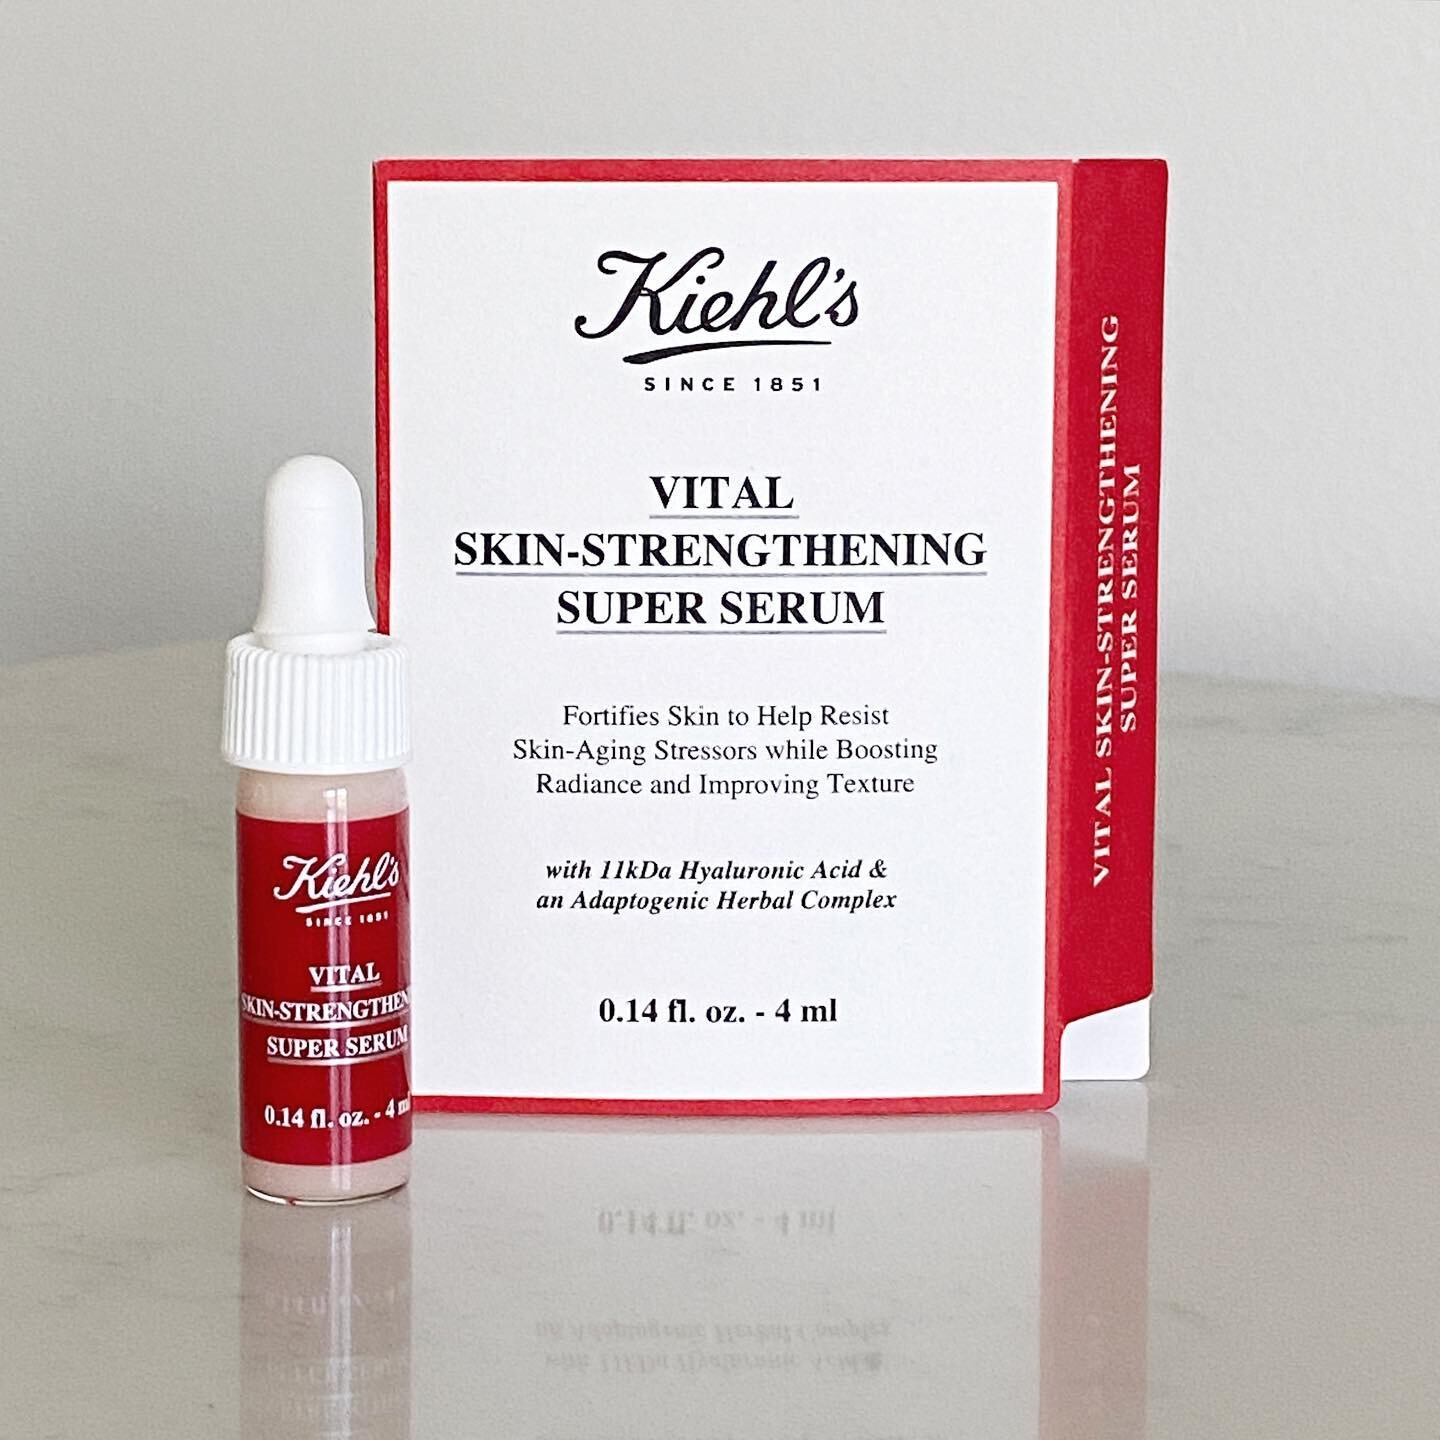 In need of some much needed radiance? I know I am. With all the Christmas prep, warm weather and being a year older my skin can do with some of @kiehls.au skin strengthening serum ✨ 

#kiehlsloveau #kiehlsessentials #gifted #kiehlsAUcompetition2022 @